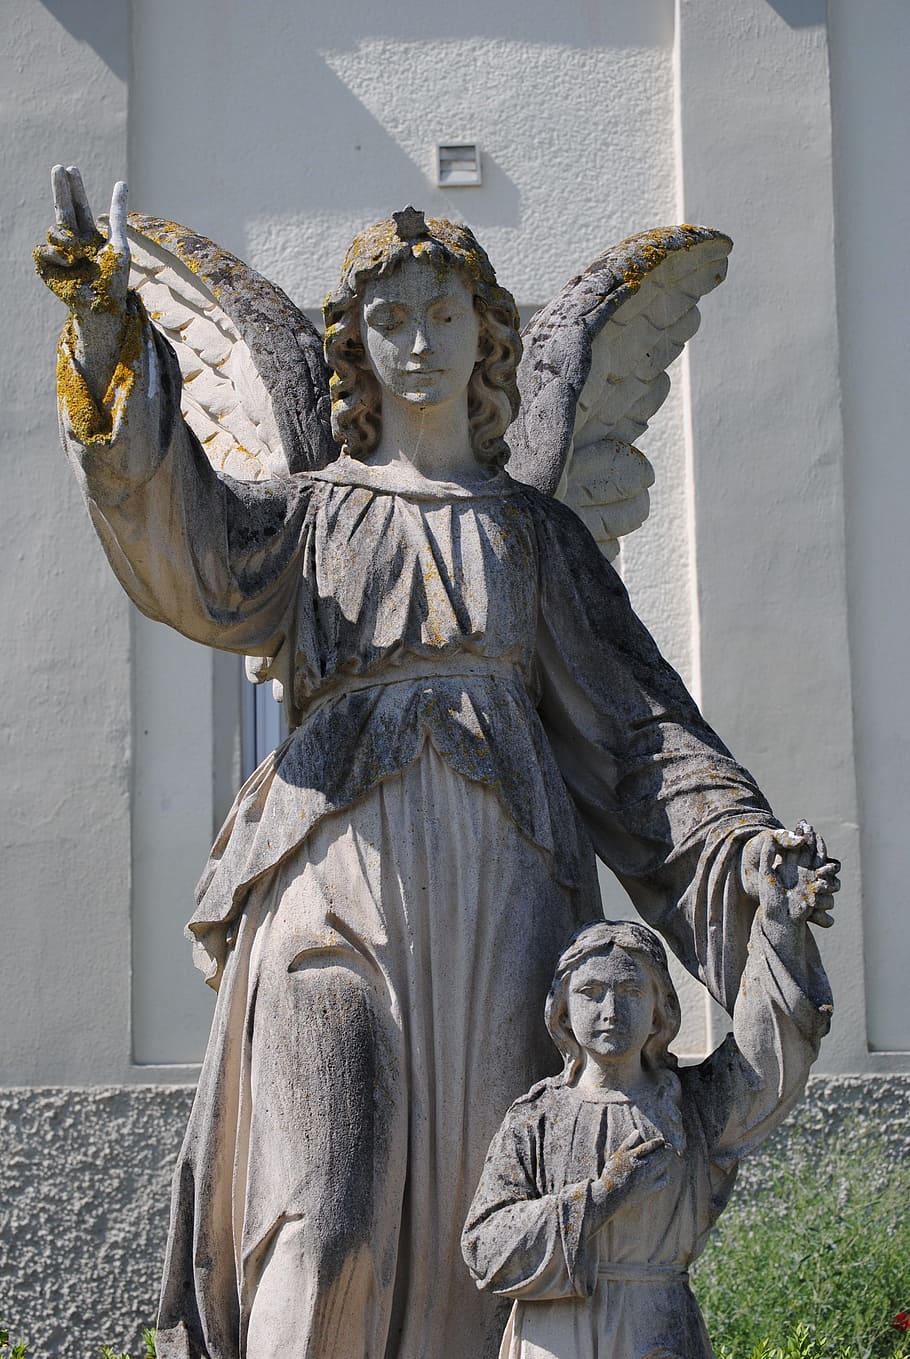 accompaniment, guardian angel, blessing, angel, protection, security, care, hand in hand, sculpture, human representation